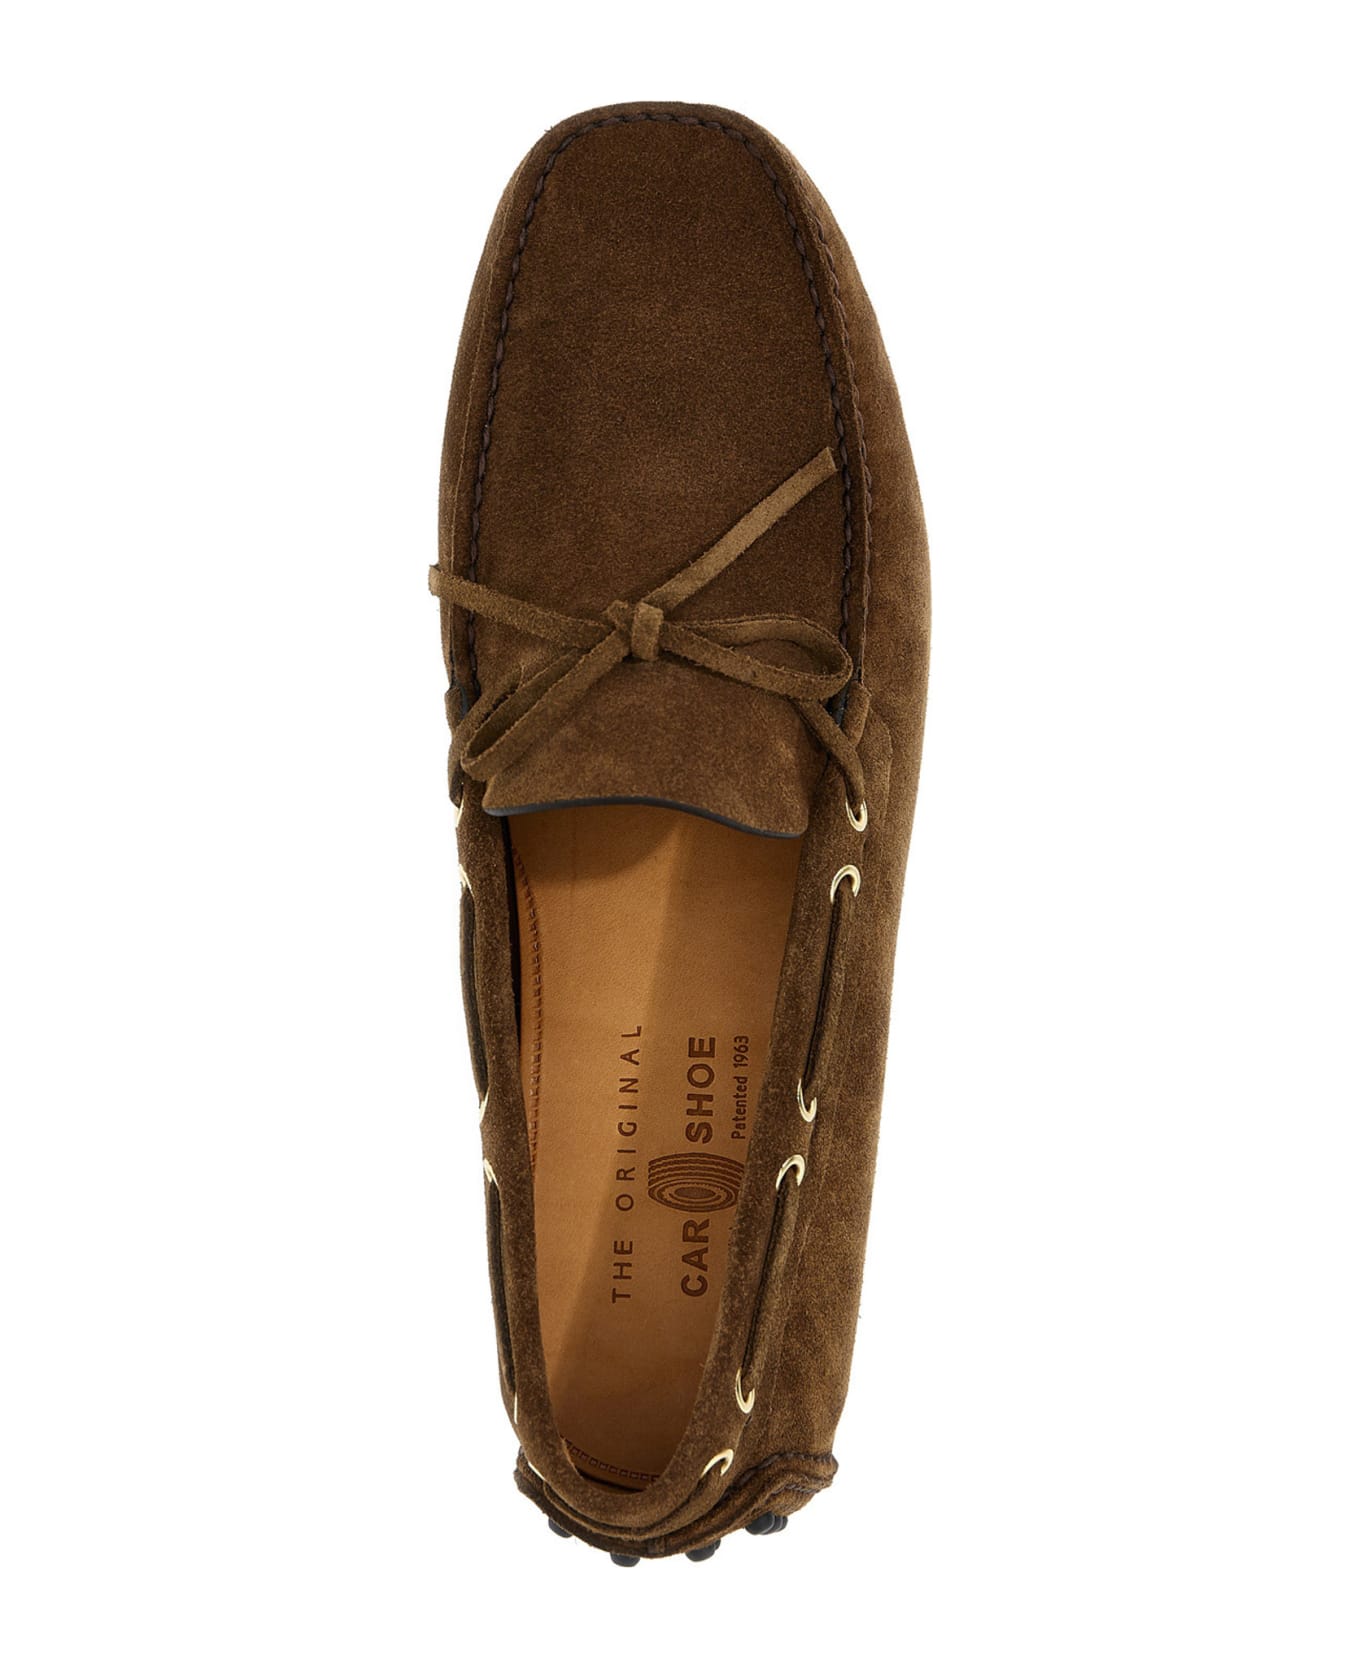 Car Shoe Suede Loafers - BROWN